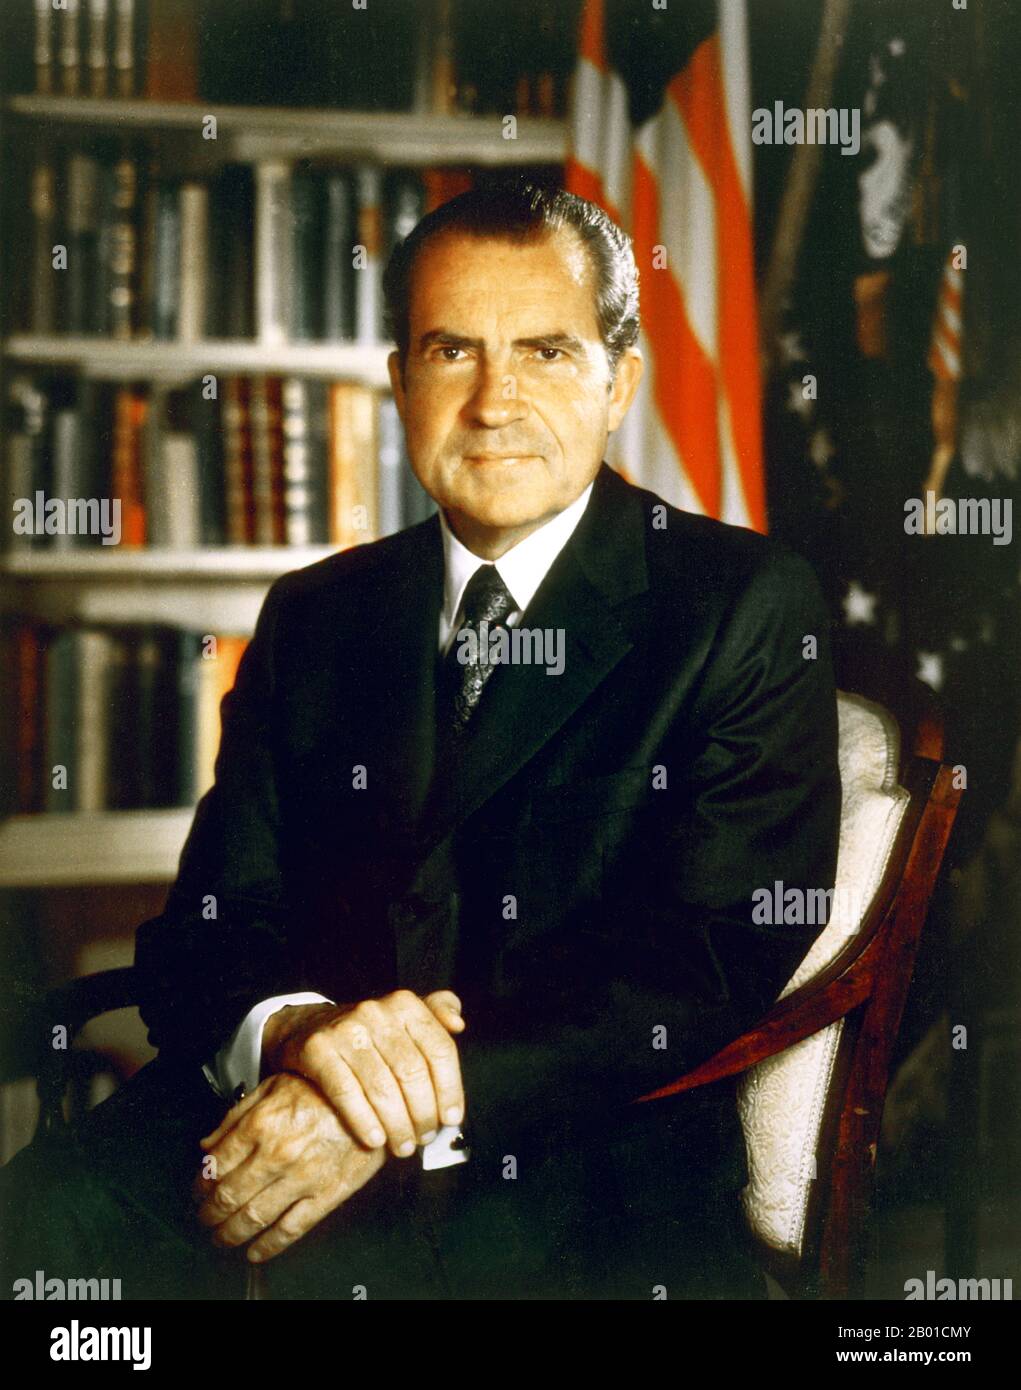 USA: Richard Nixon (9 January 1913 - 22 April 1994), 37th President of the United States (1969-1974). Official presidential portrait, 8 July 1971.  Richard Milhous Nixon was the 37th President of the United States, serving from 1969 to 1974. Nixon is the only president to have resigned the office.  Nixon inherited the Vietnam War from his predecessors Kennedy and Johnson. American involvement in Vietnam was widely unpopular; although Nixon initially escalated the war there, he subsequently moved to end US involvement, completely withdrawing American forces by 1973. Stock Photo